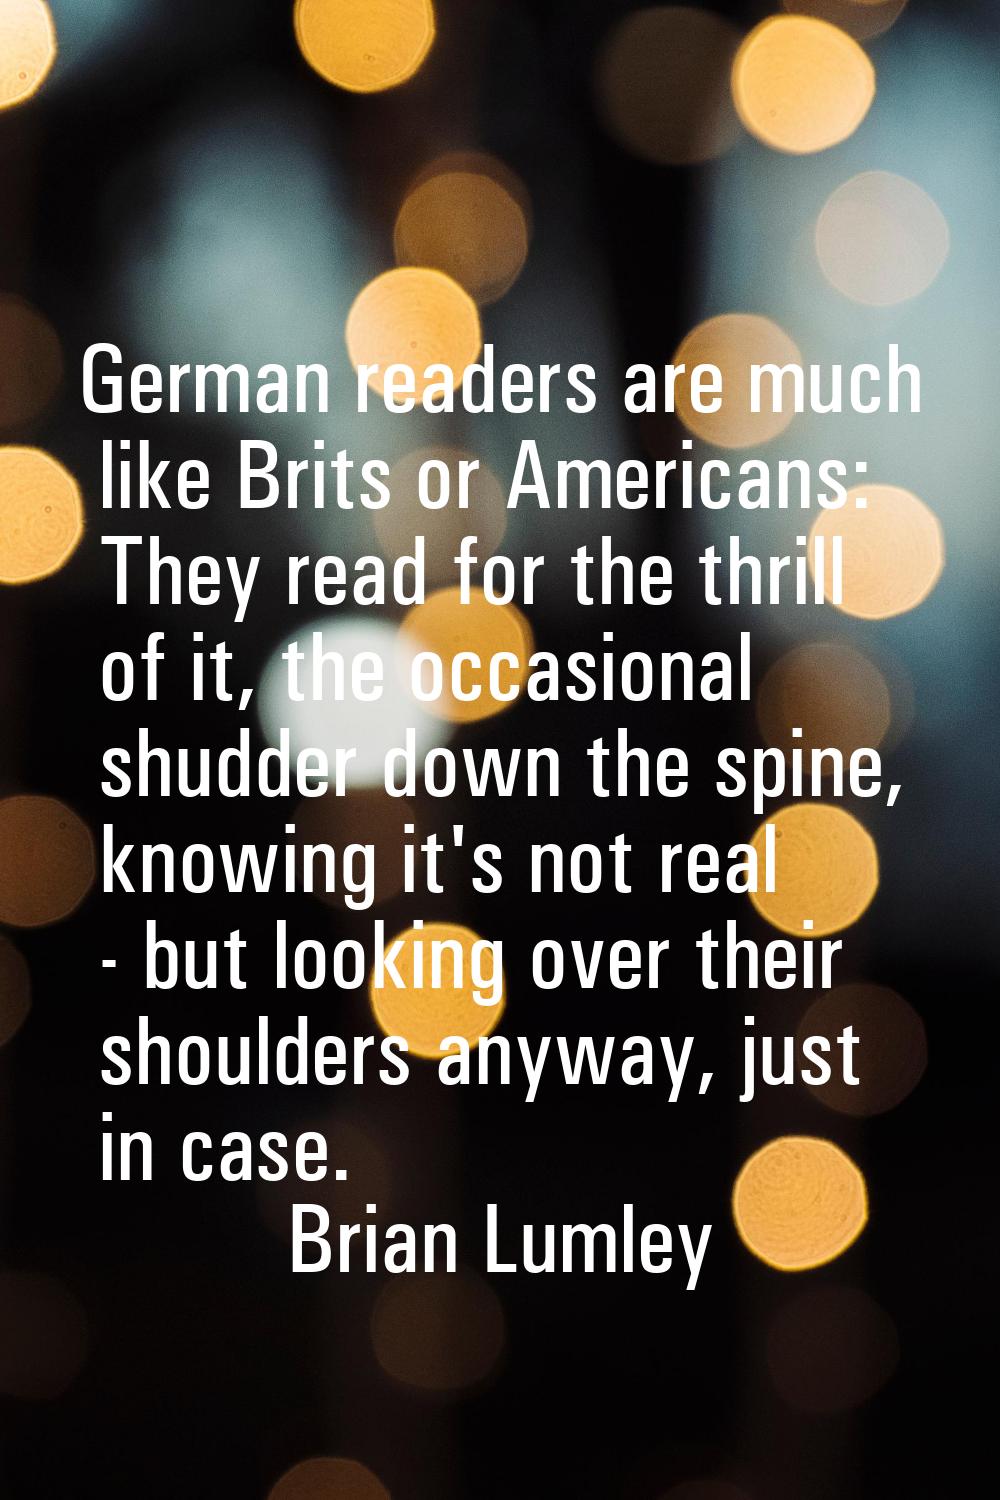 German readers are much like Brits or Americans: They read for the thrill of it, the occasional shu